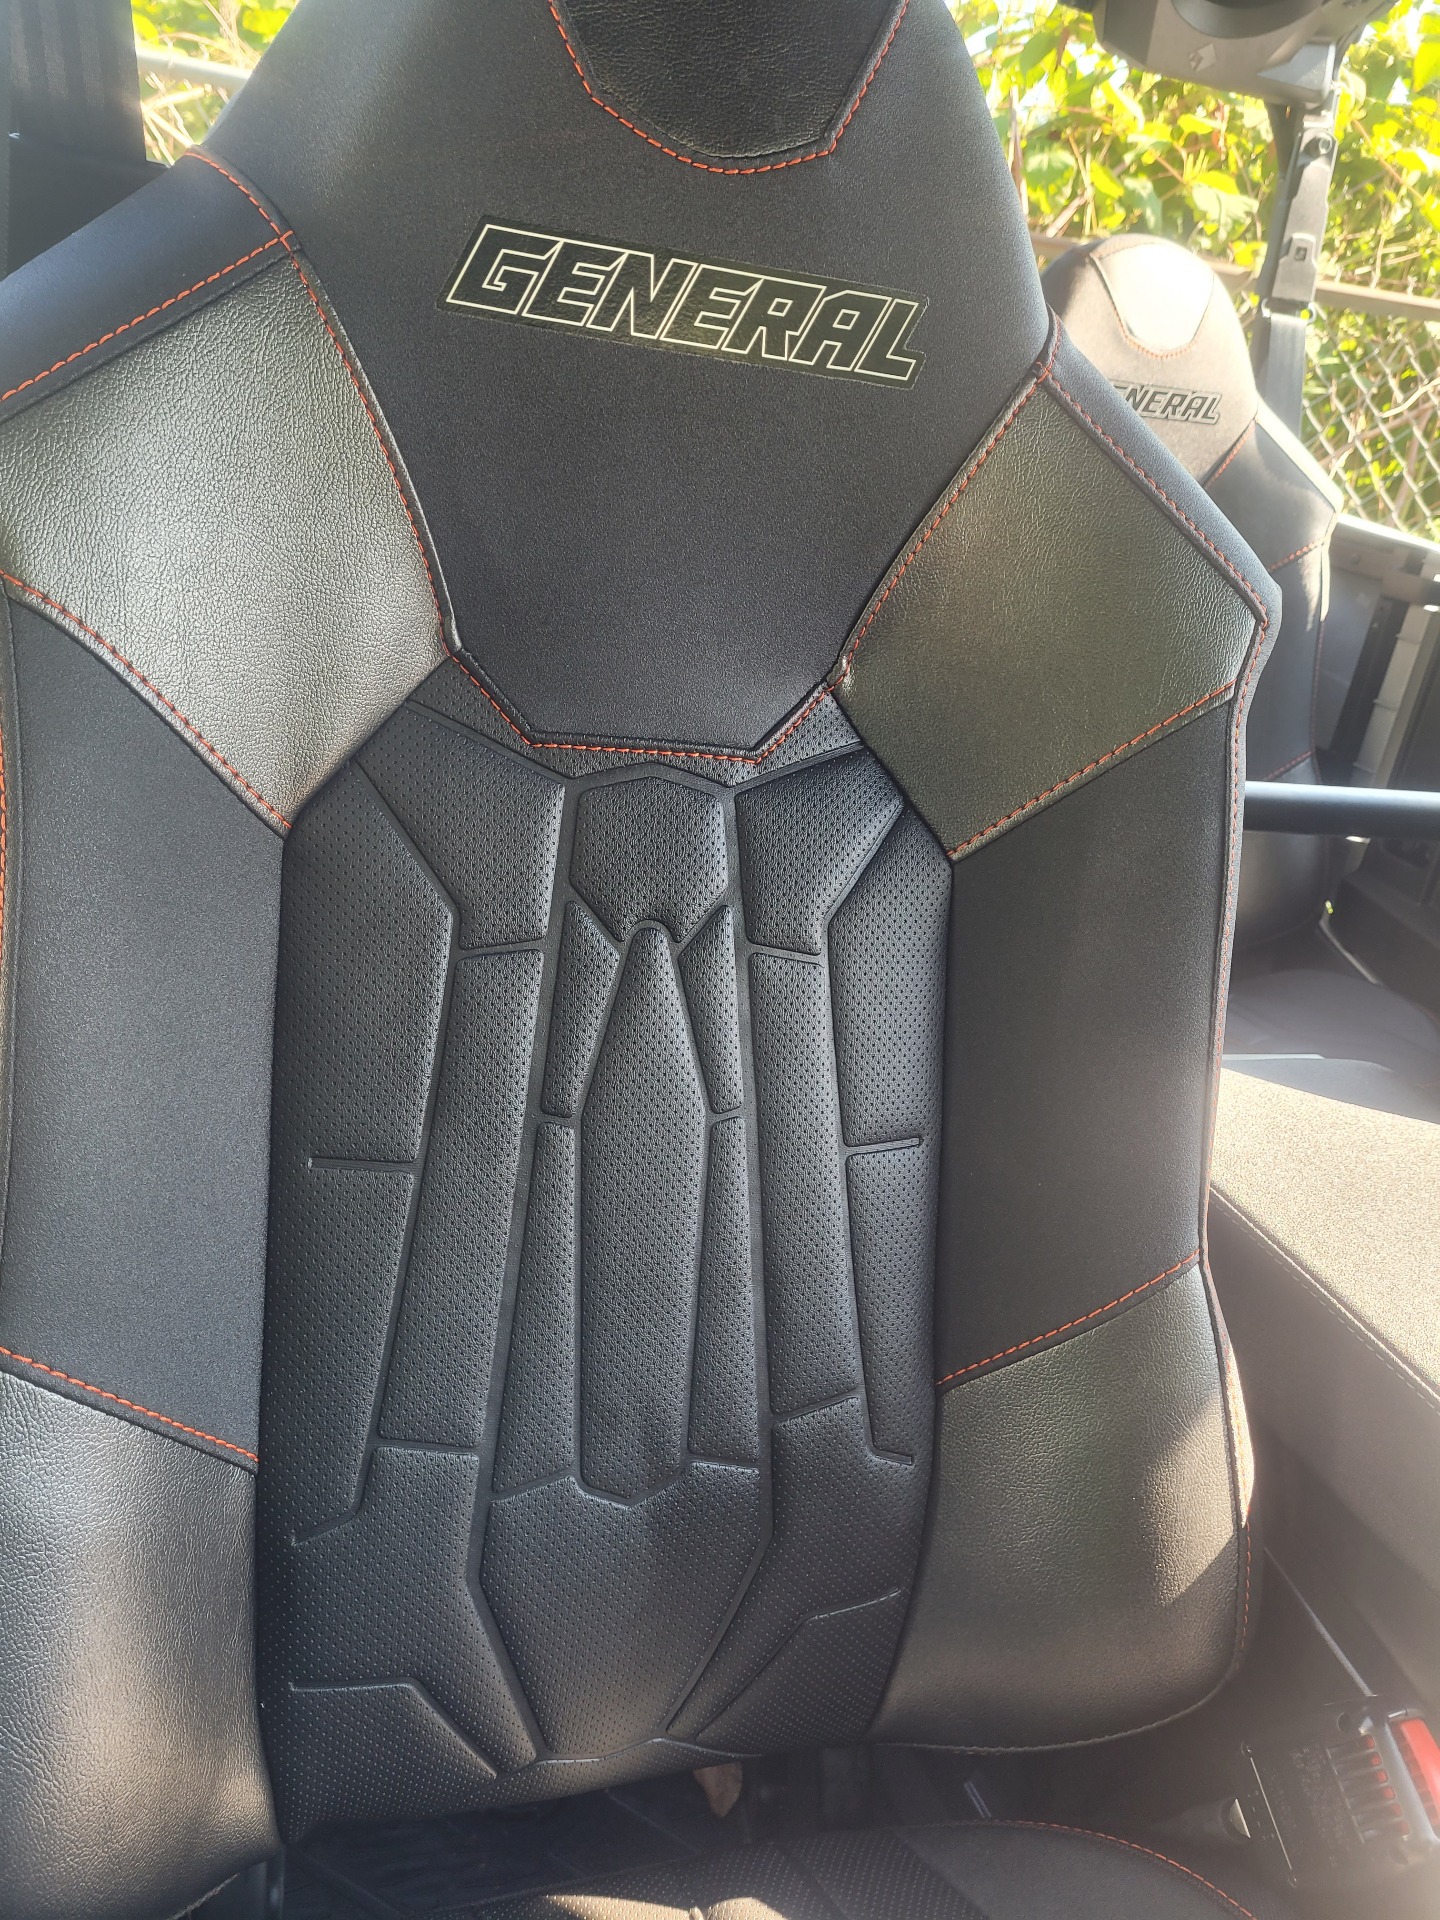 2022 Polaris General XP 1000 Deluxe Ride Command in Ledgewood, New Jersey - Photo 4